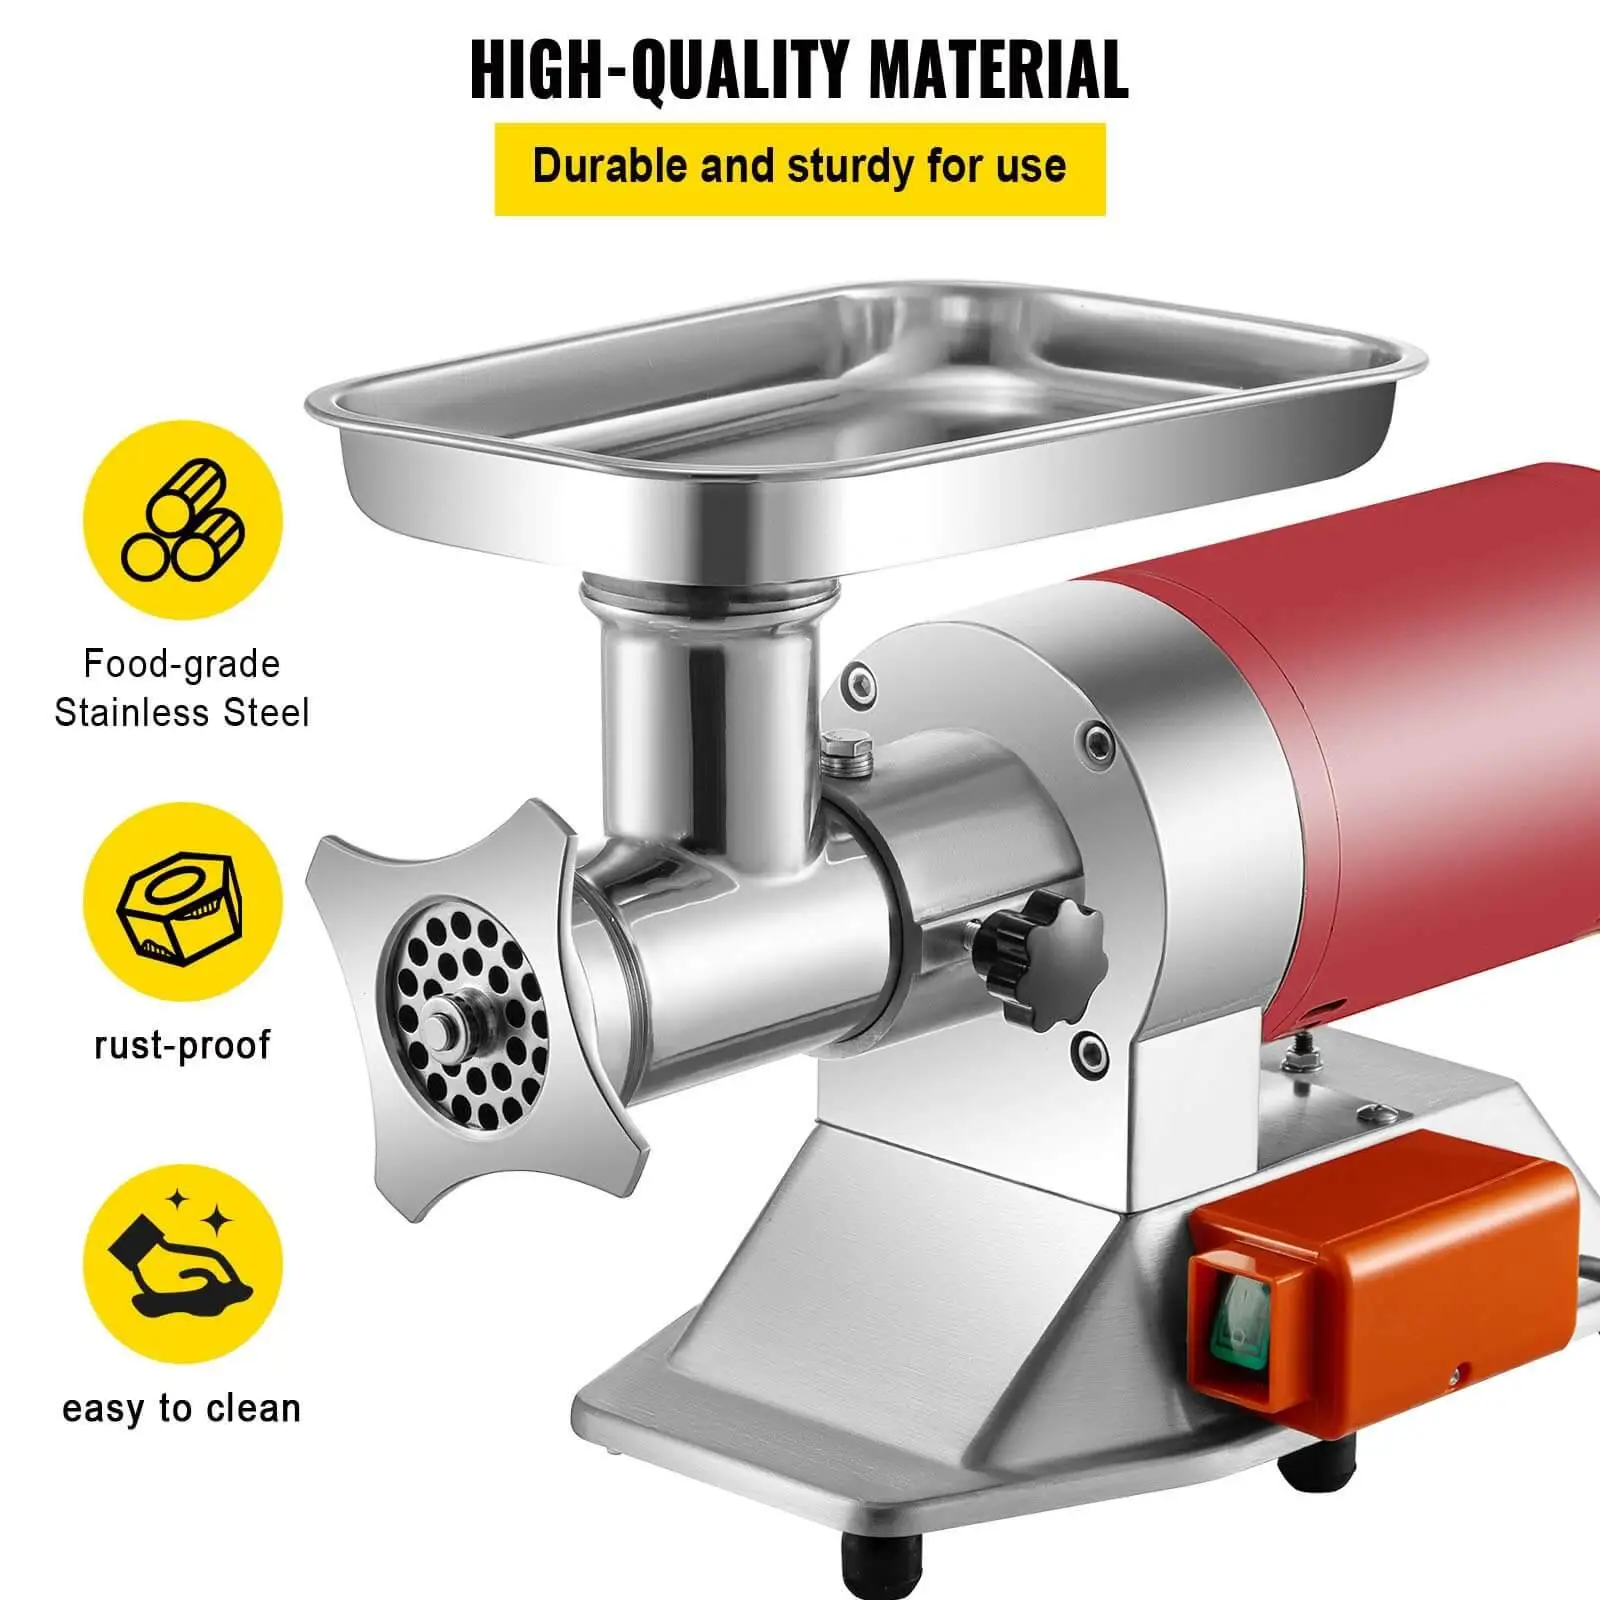 VEVOR quality and sturdy meat grinder